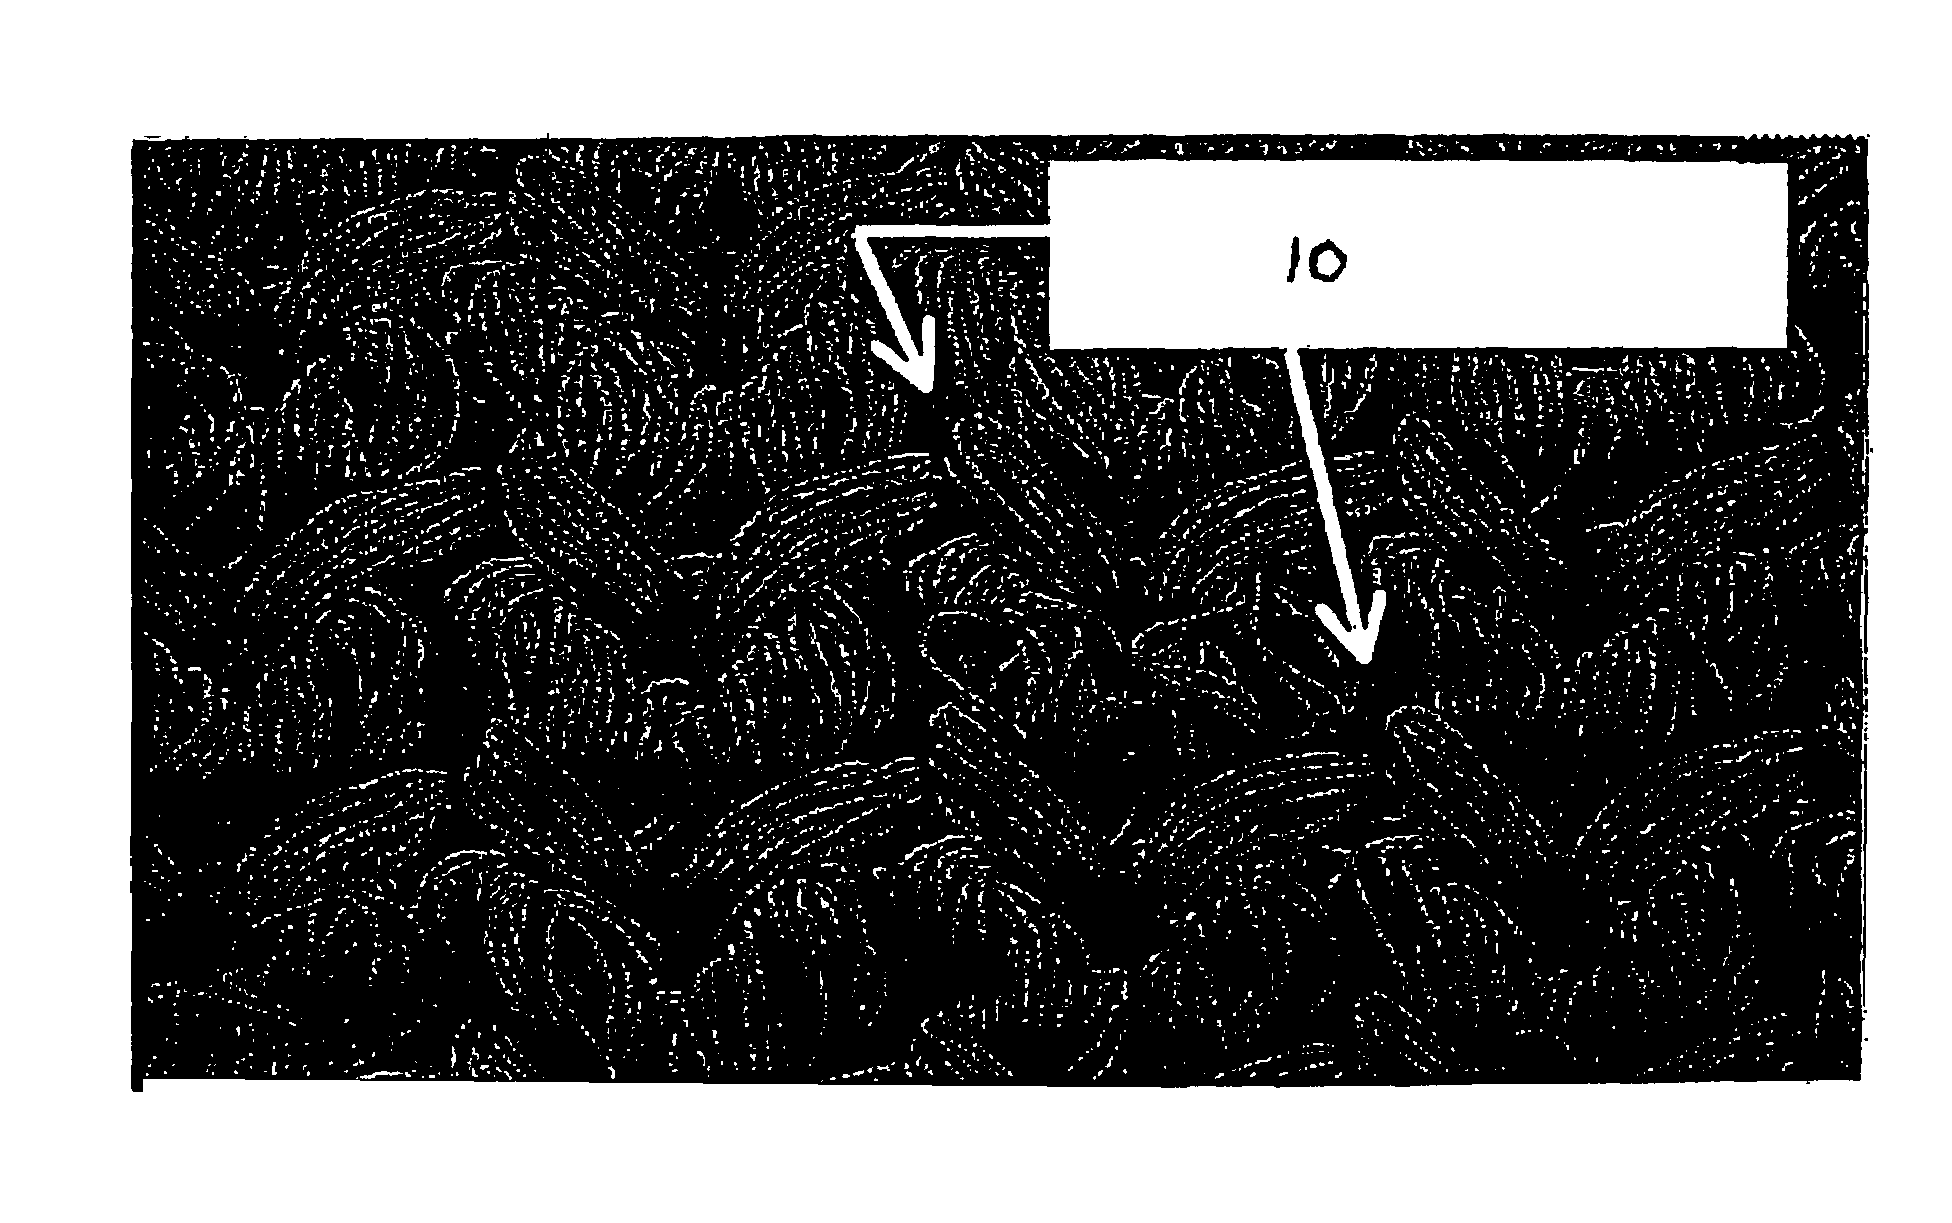 Blood-tight implantable textile material and method of making